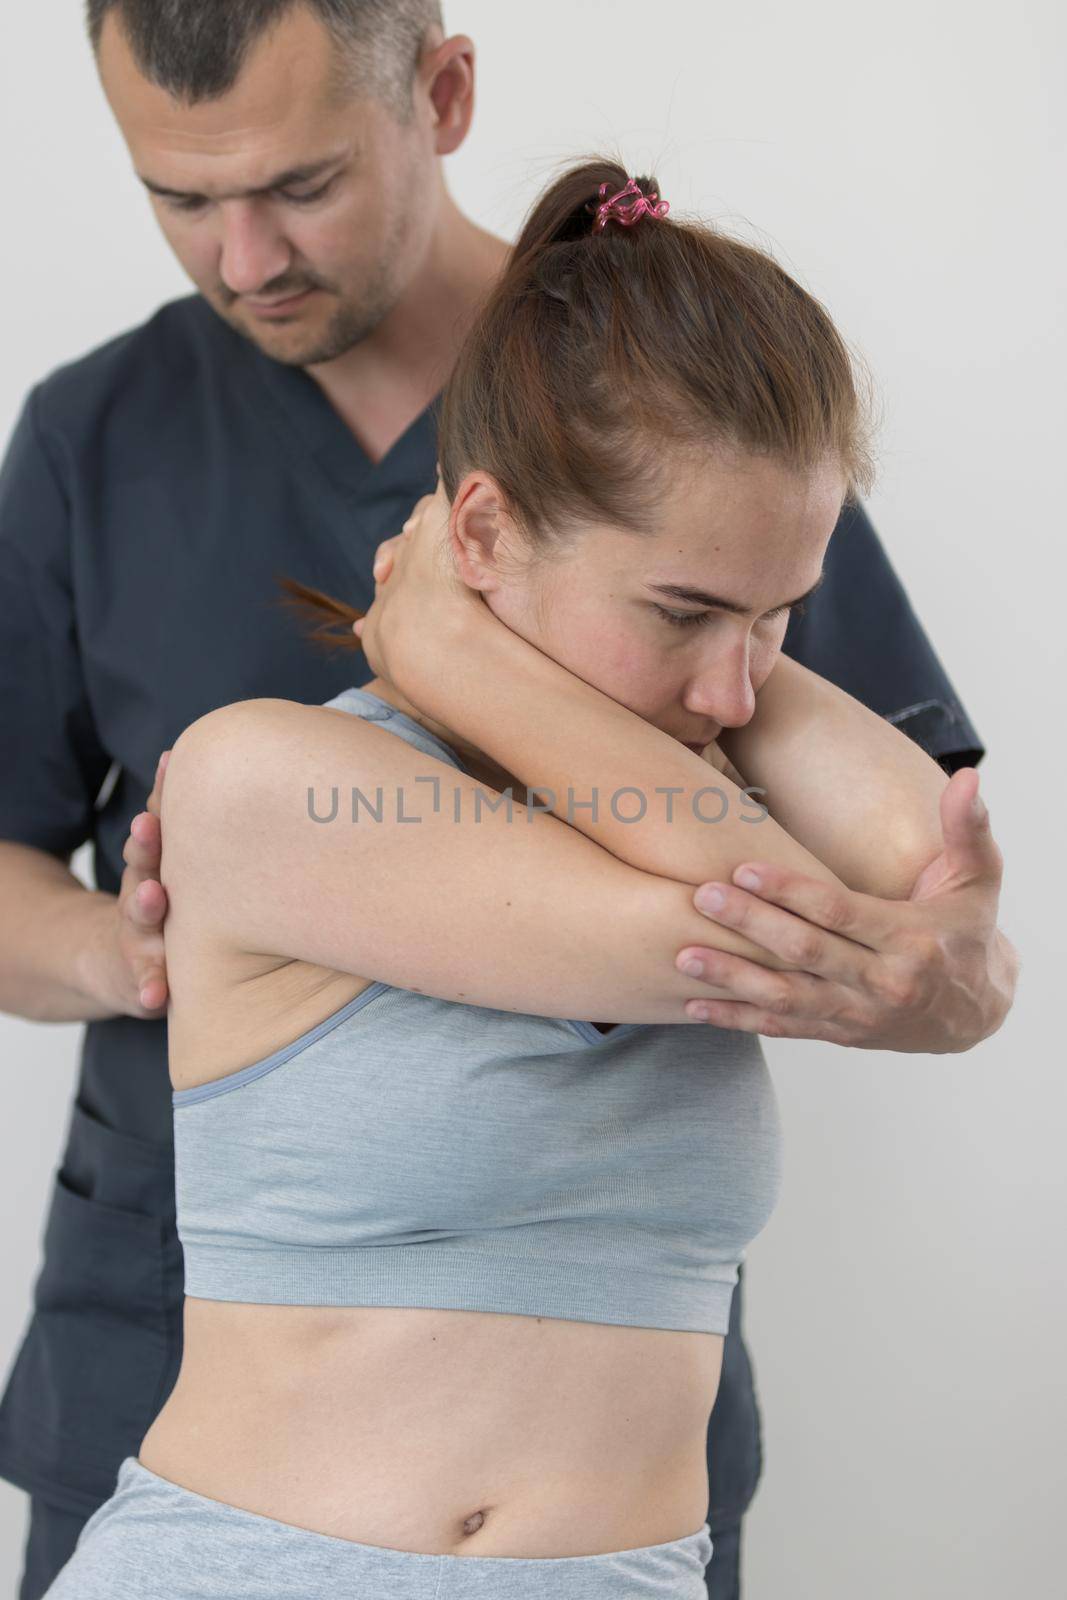 Chiropractic treatment - the doctor knocks the young woman's elbows together and turning her to the side. Mid shot